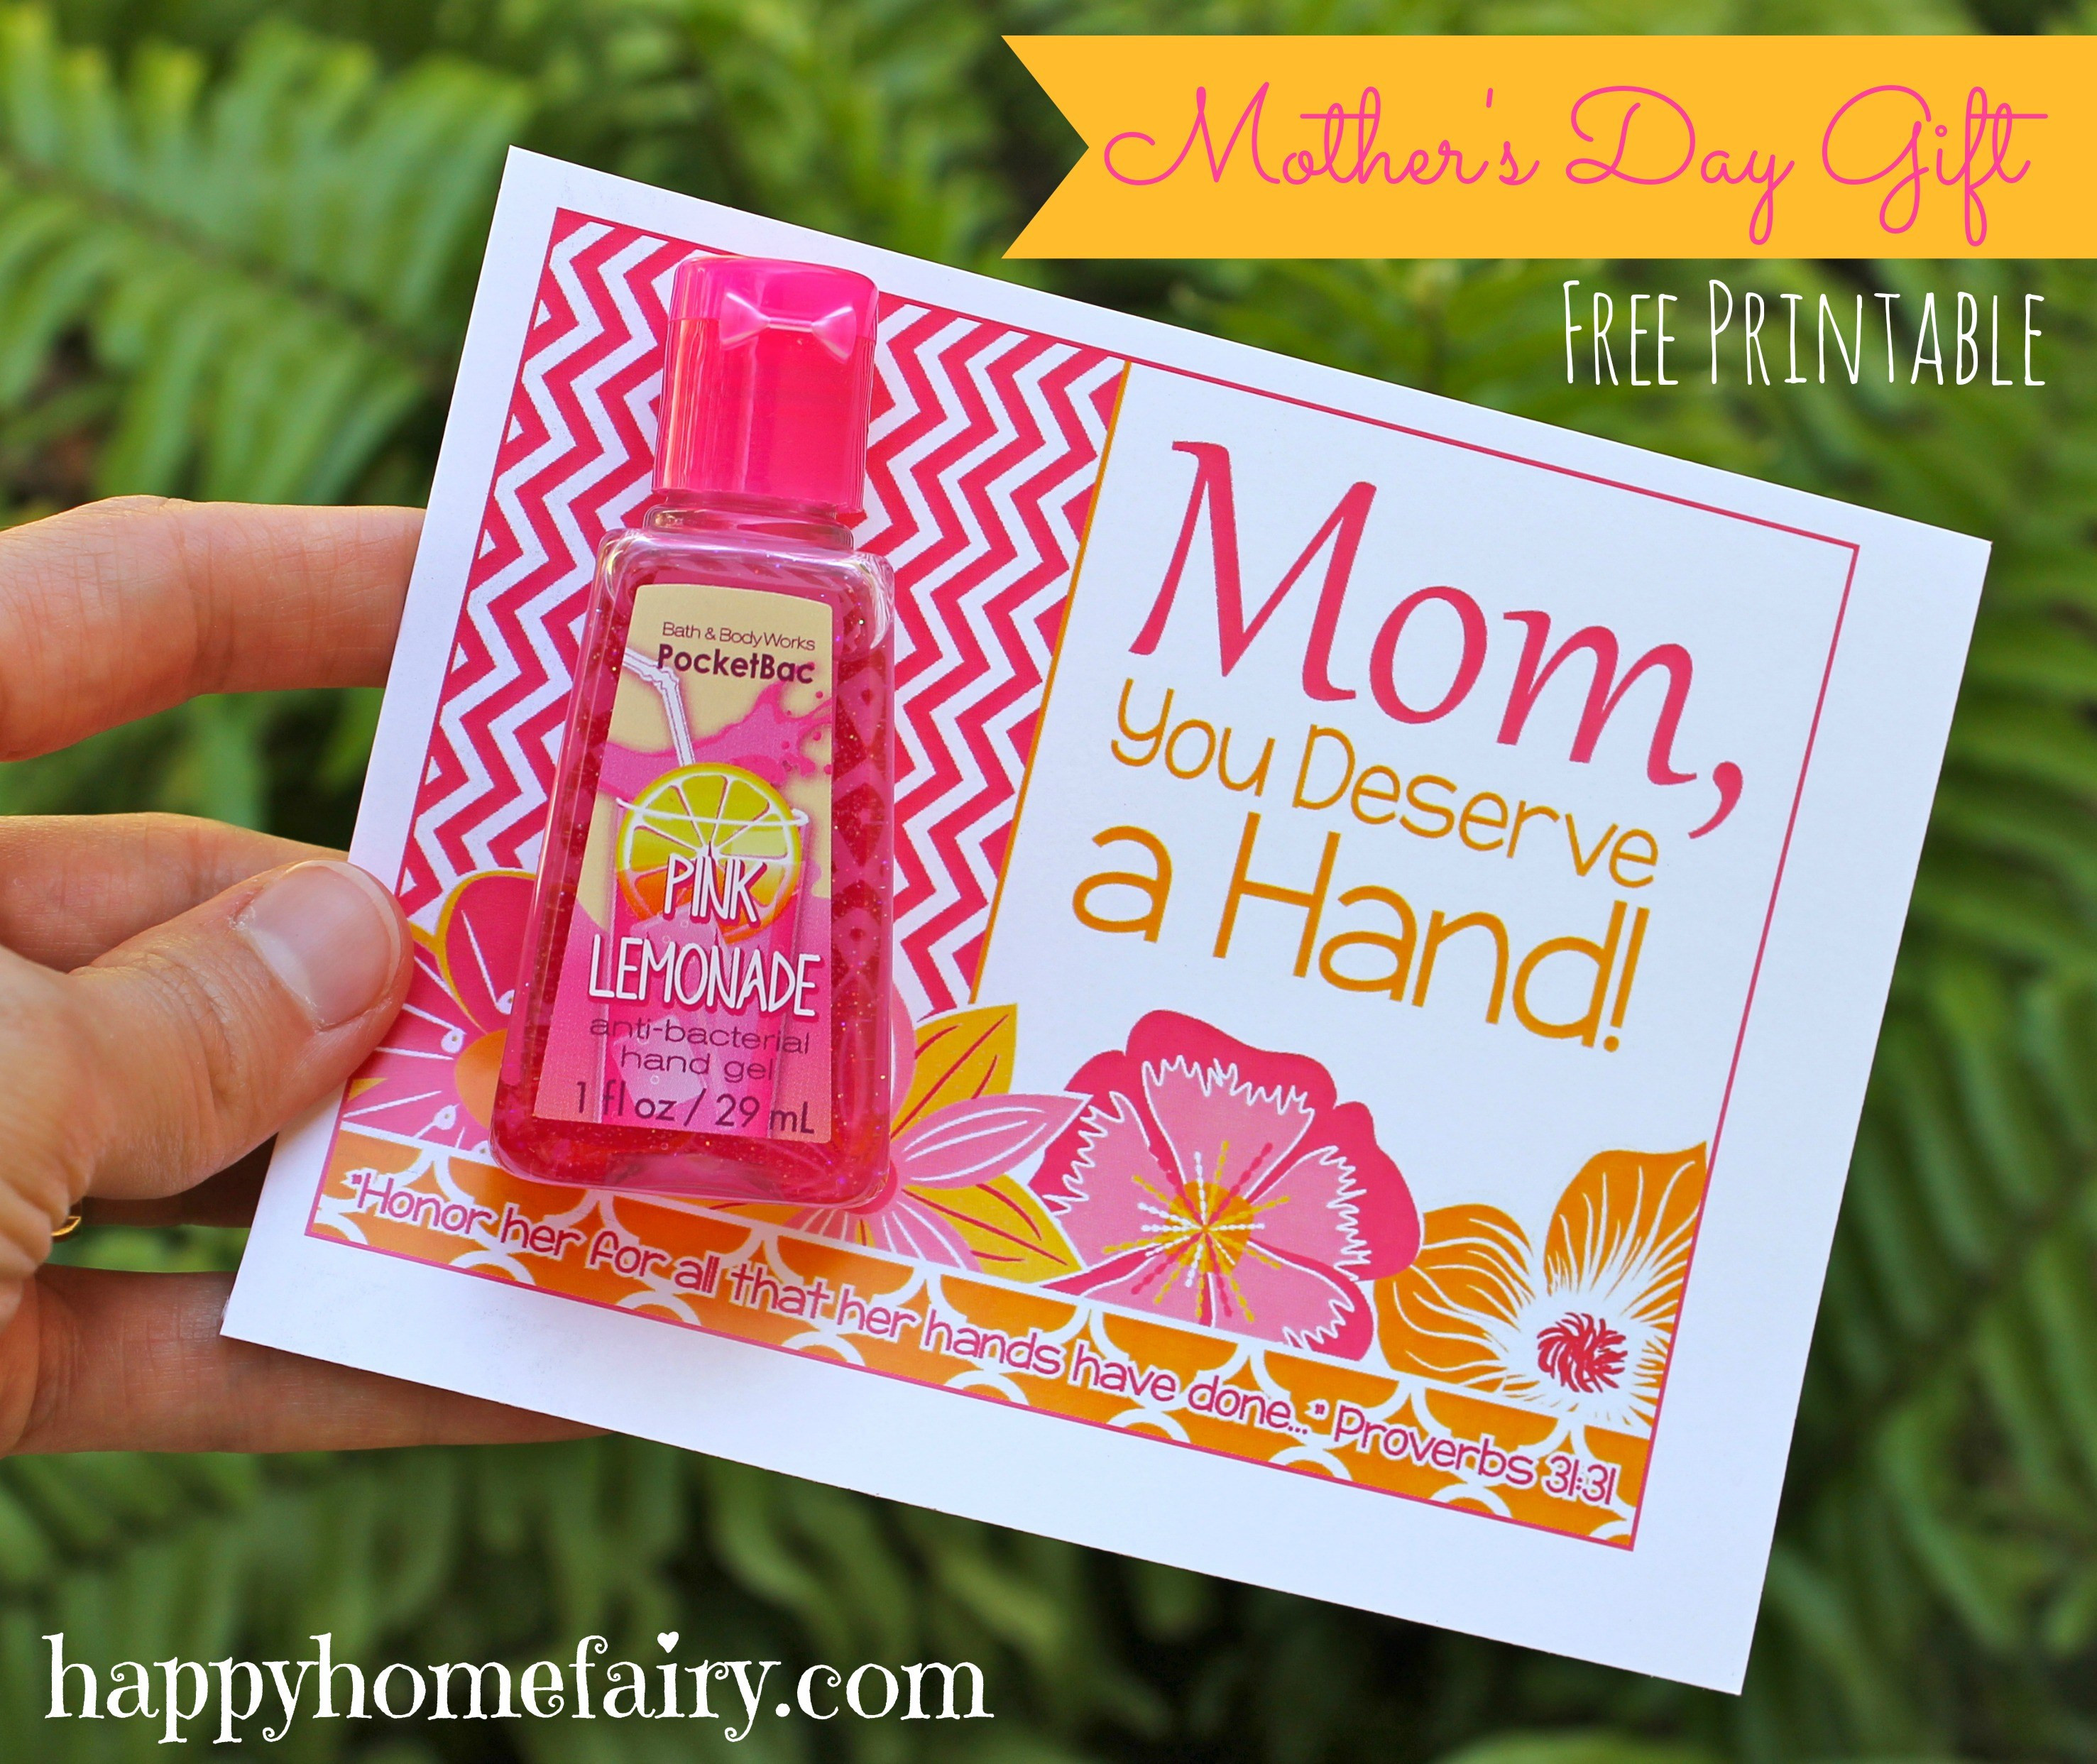 Mothers Day Ideas Gift
 Easy Mother s Day Gift Idea FREE Printable Happy Home